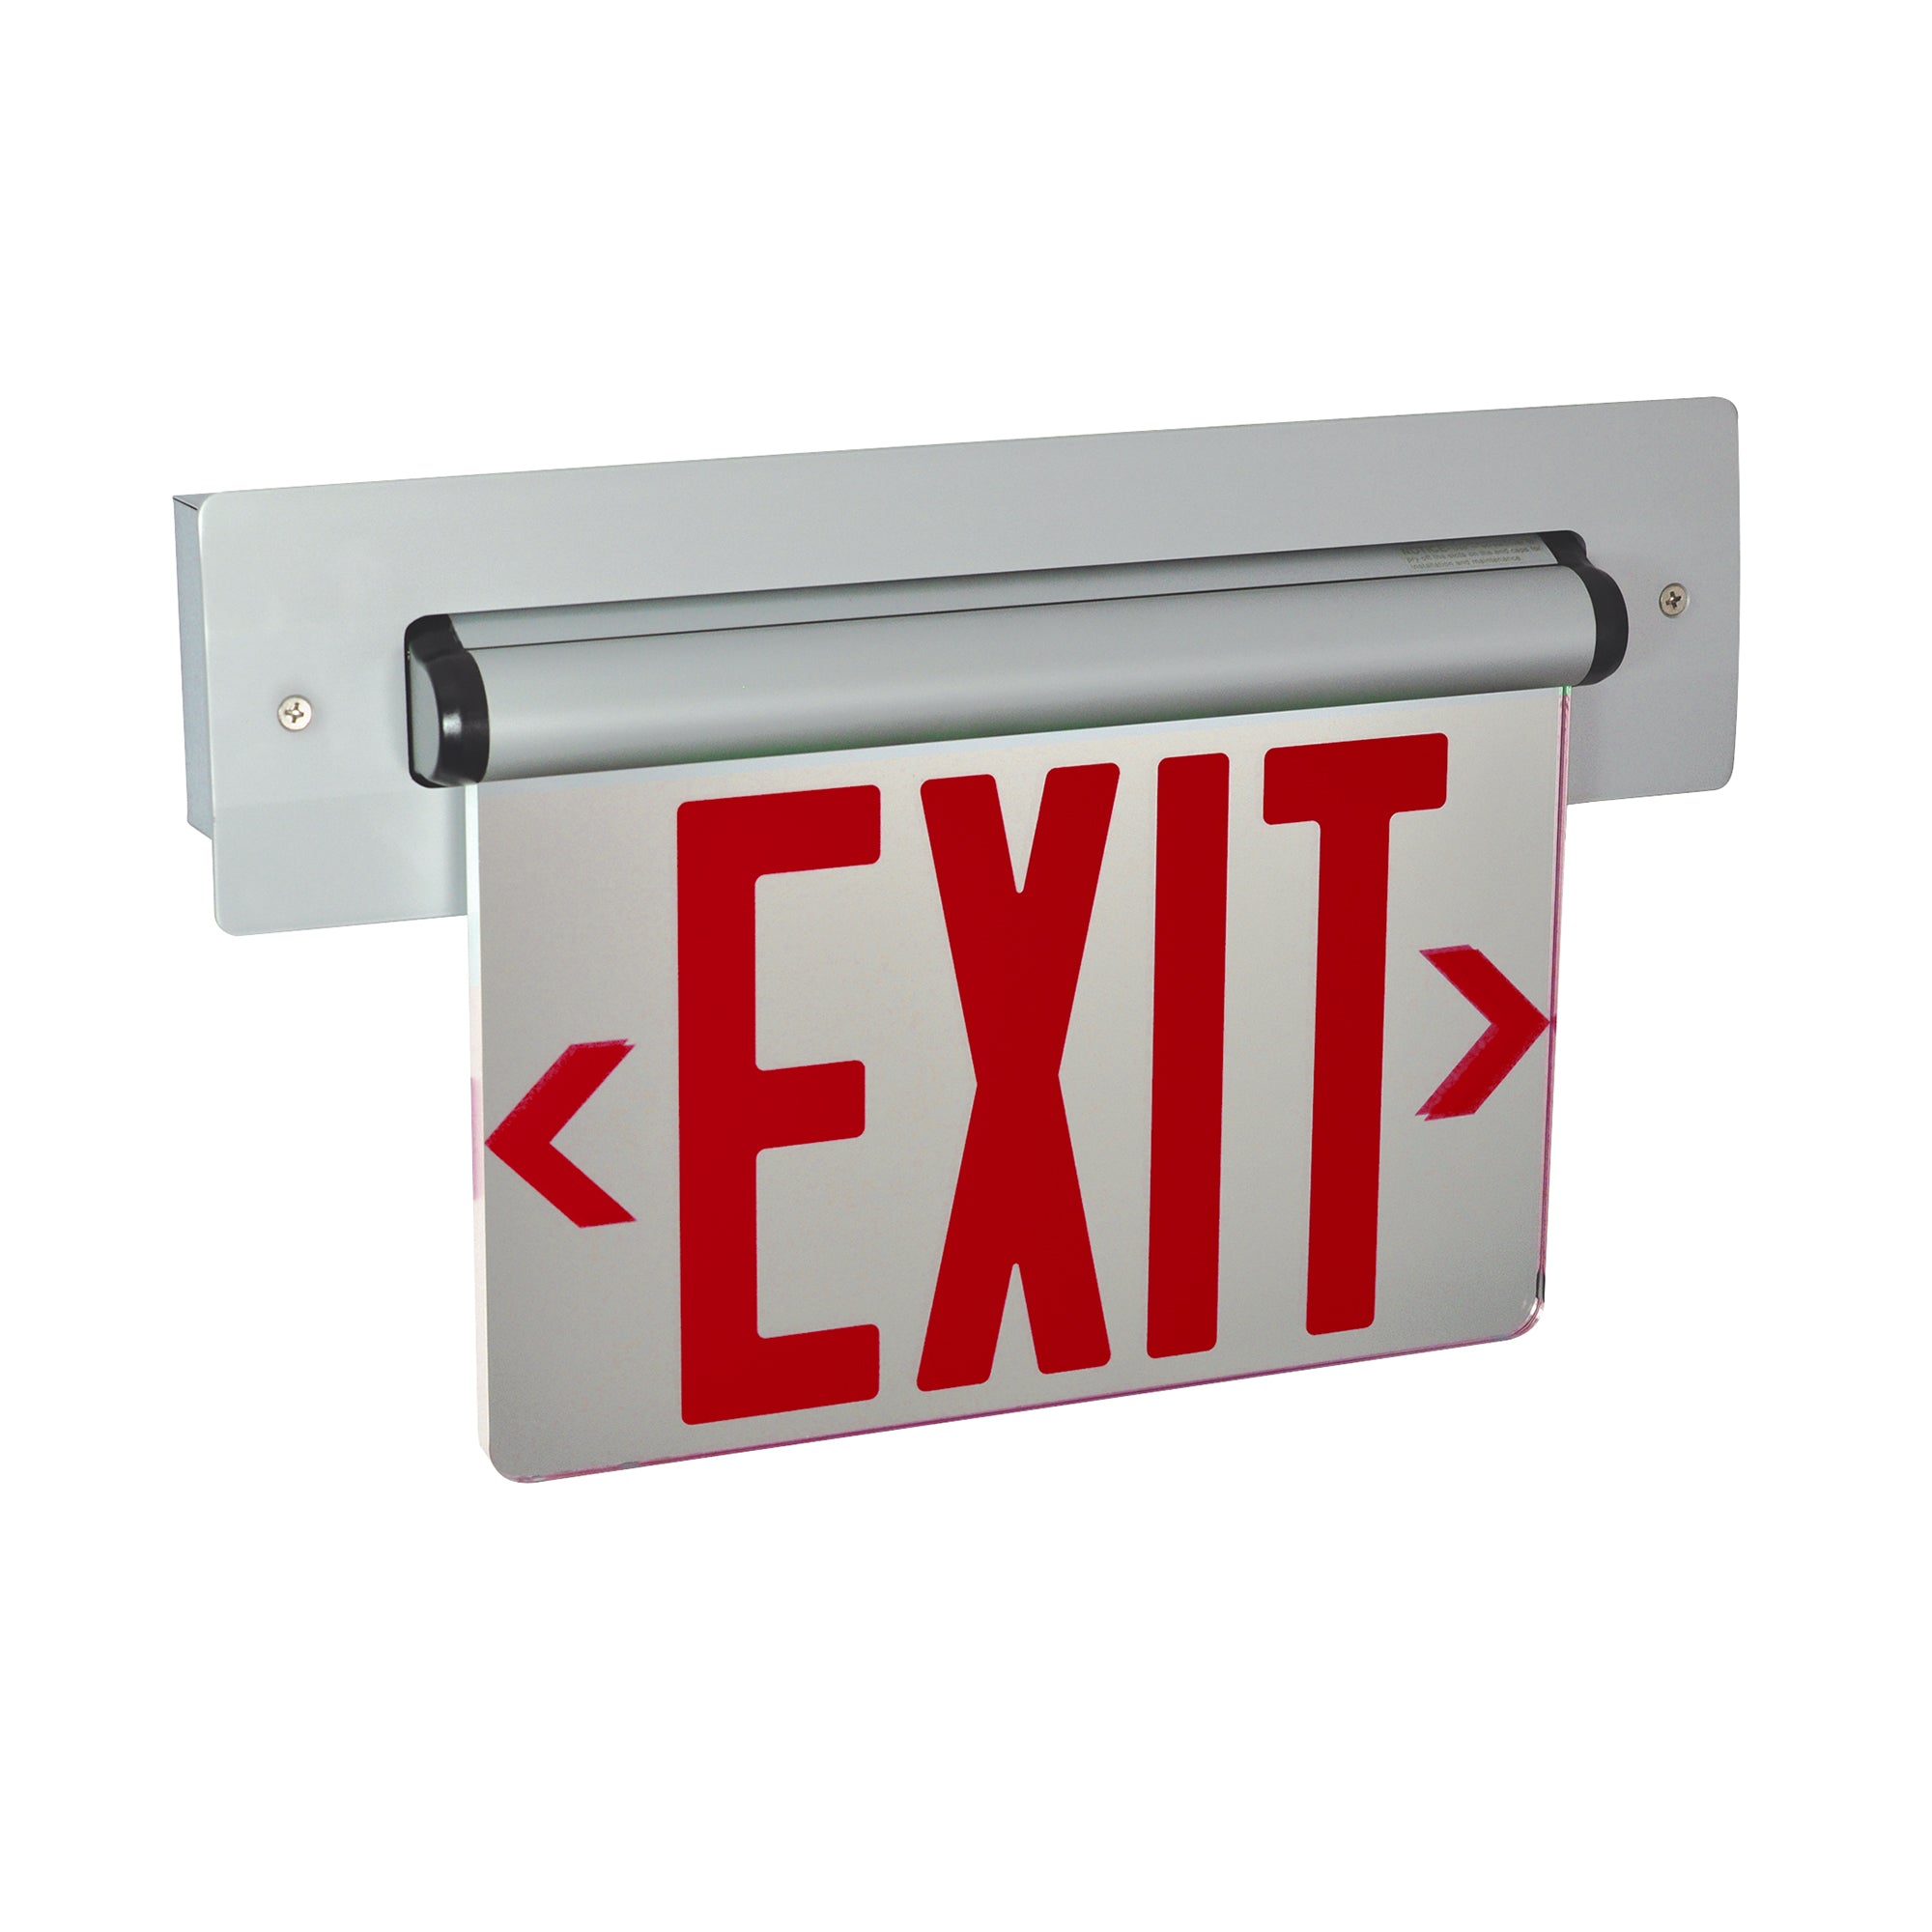 Nora Lighting NX-813-LEDRMW - Exit / Emergency - Recessed Adjustable LED Edge-Lit Exit Sign, AC Only, 6 Inch Red Letters, Single Face / Mirrored Acrylic, White Housing